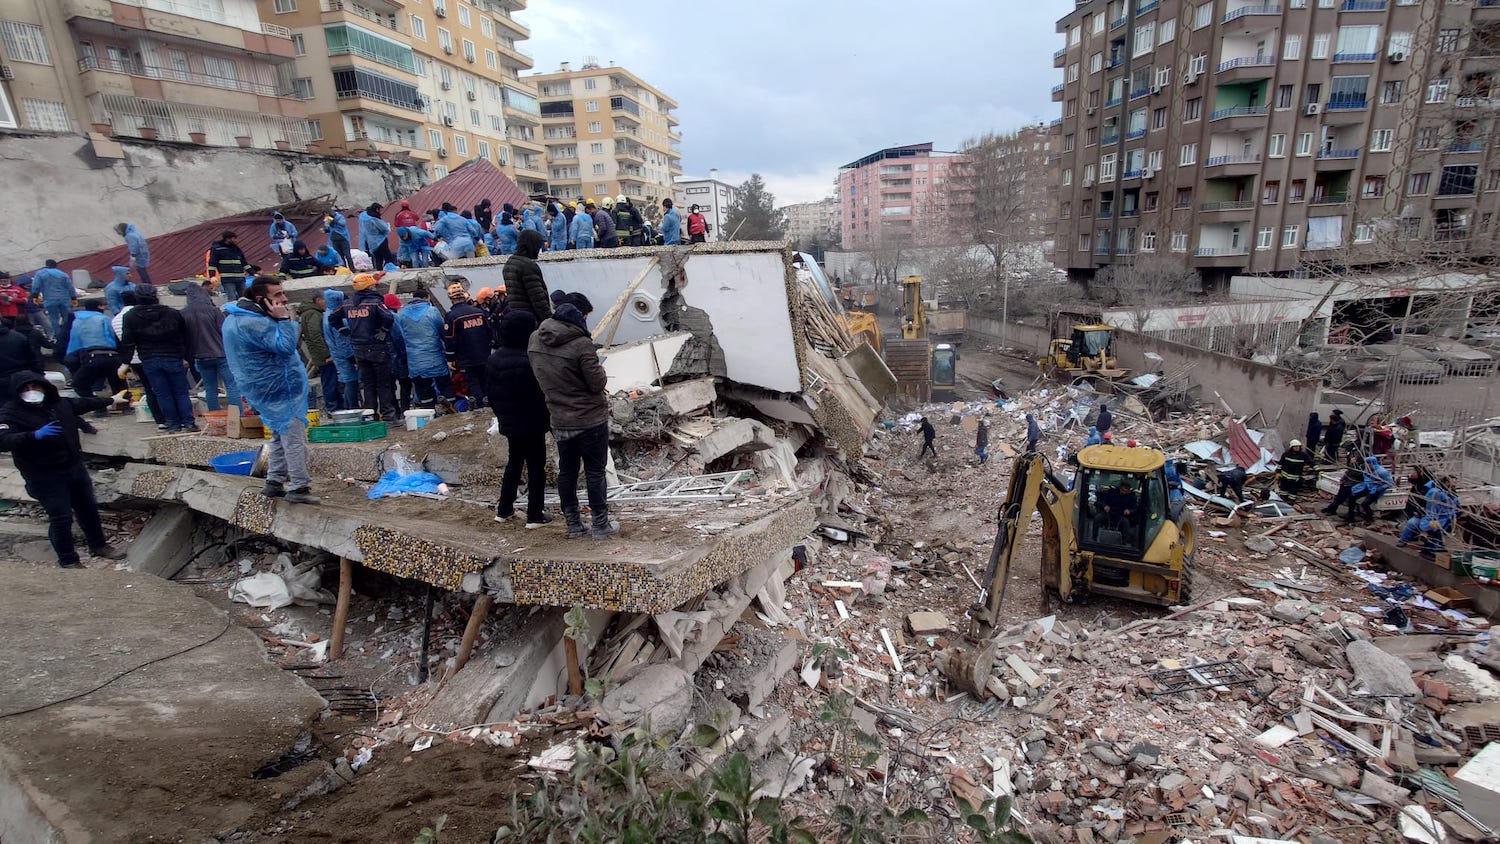 Rescue workers search through rubble following an earthquake in the southeastern Turkish city of Diyarbakir.